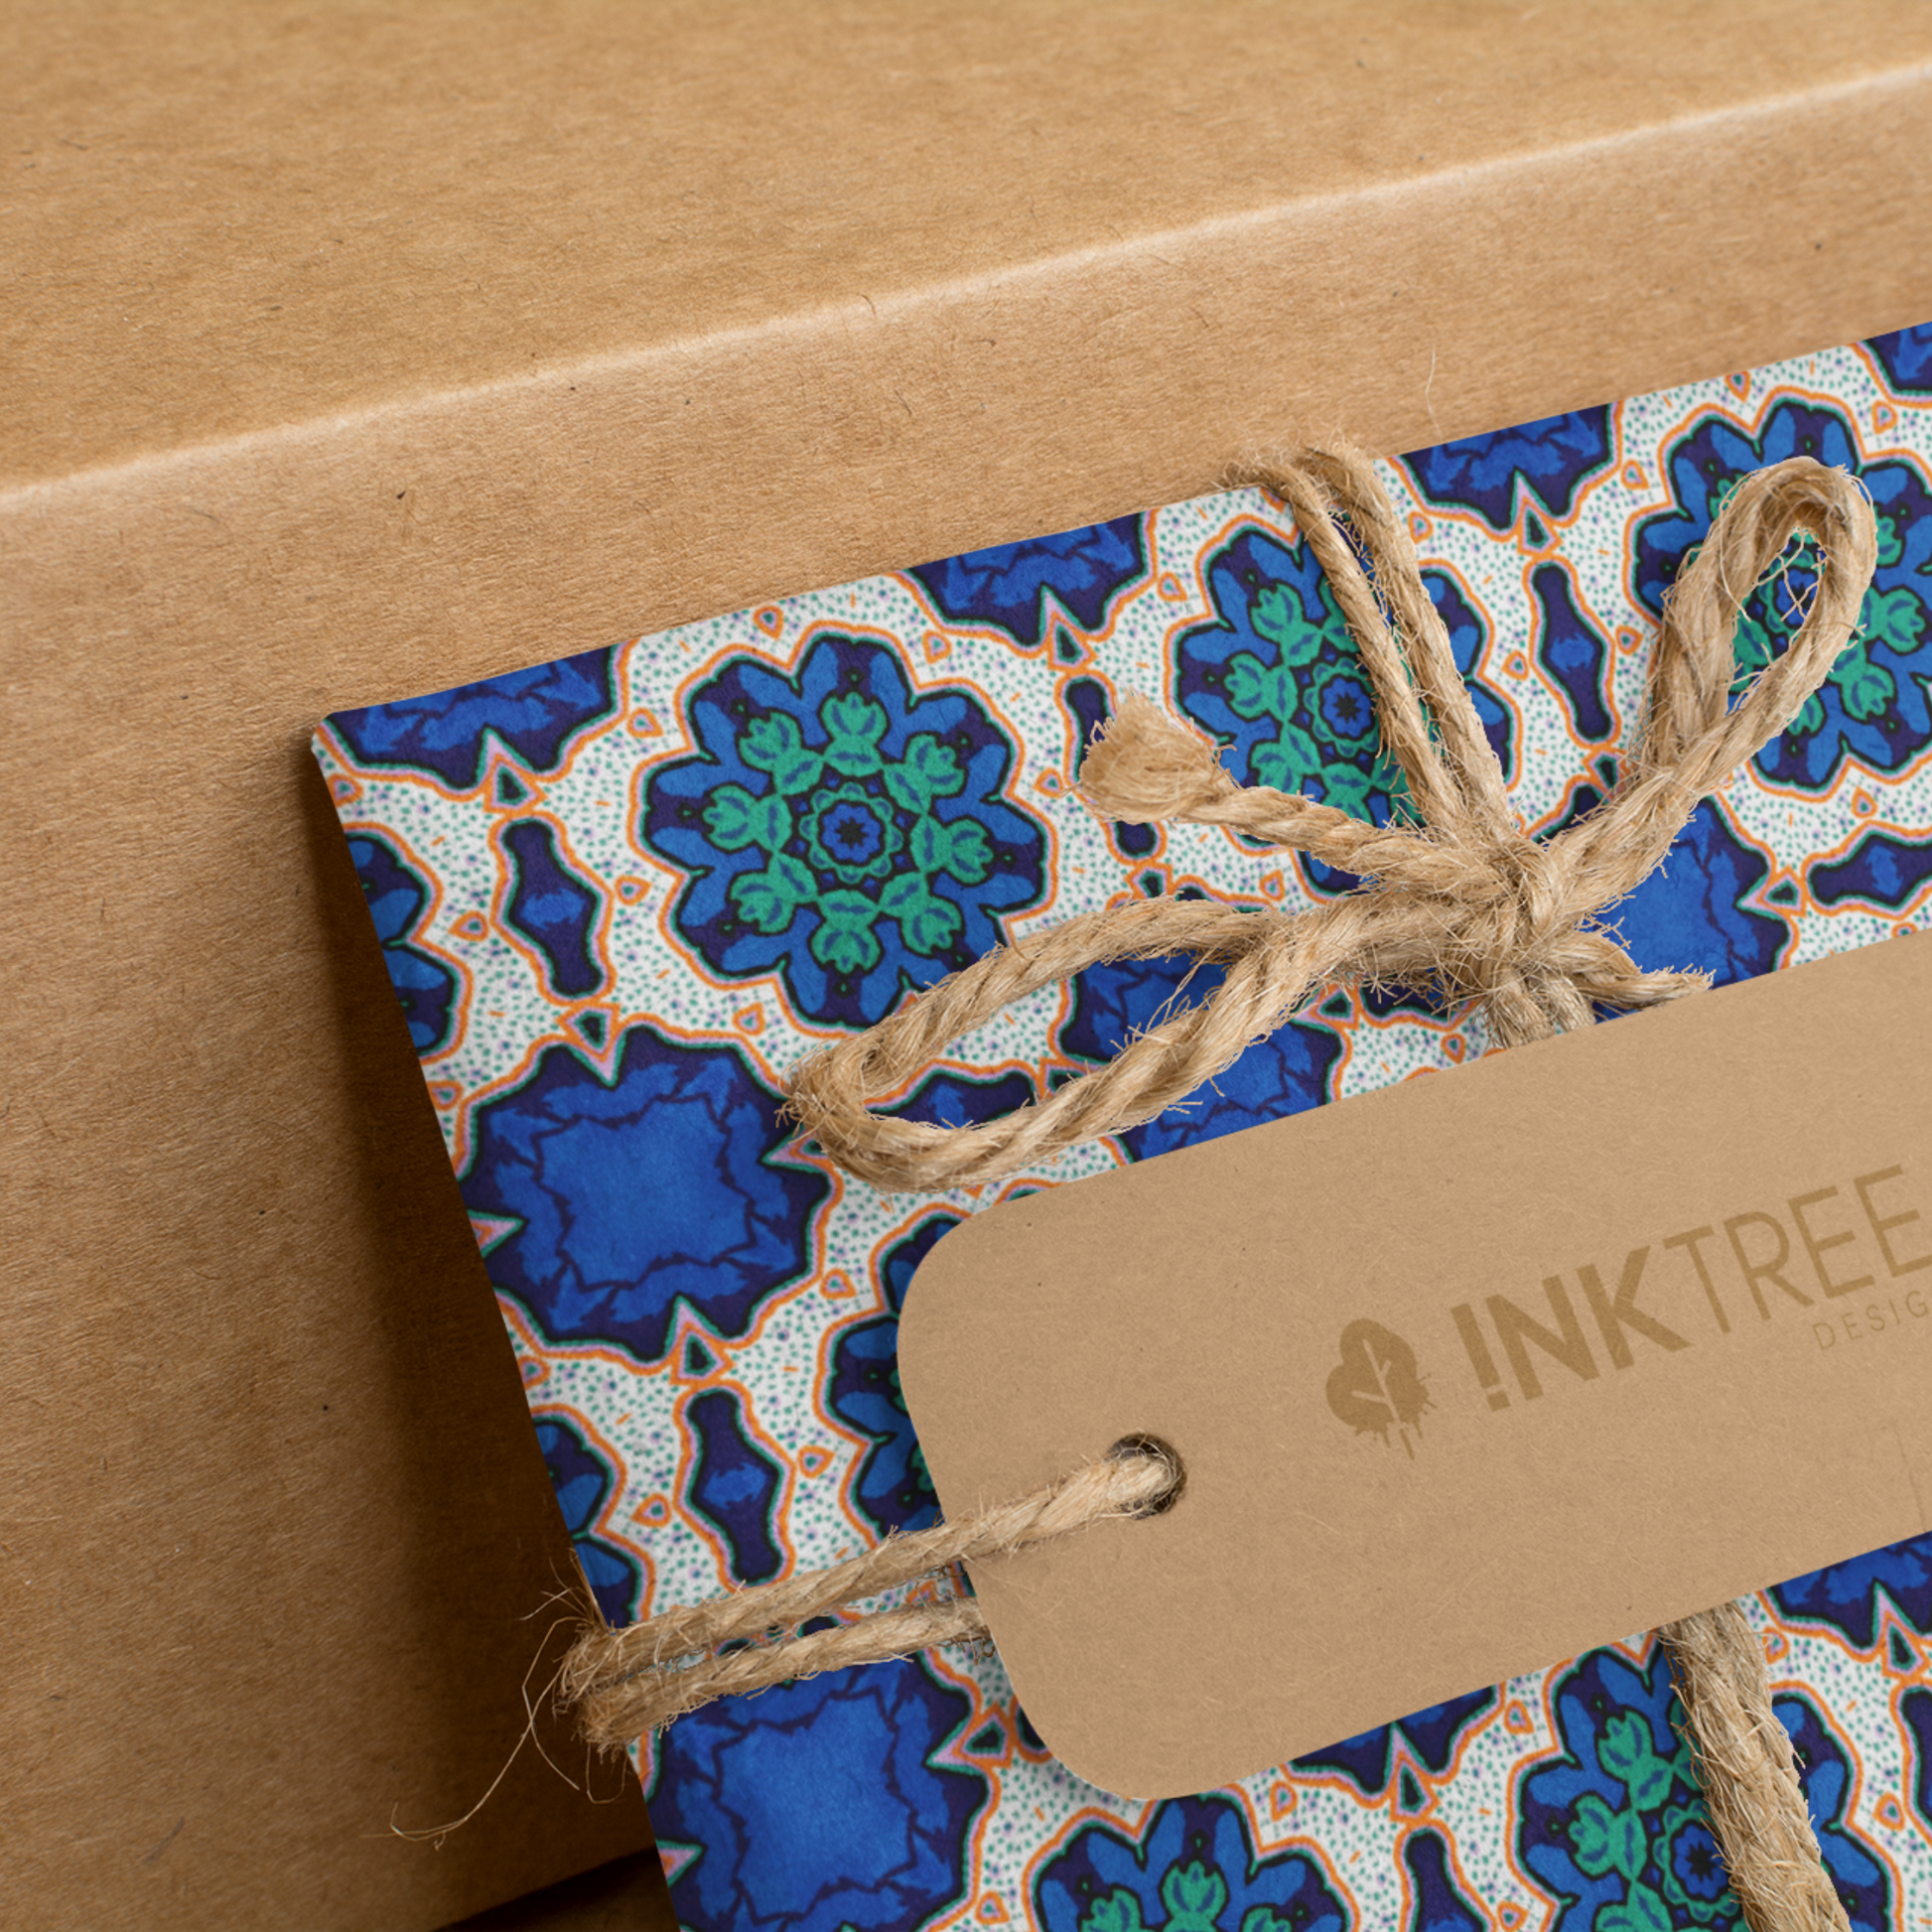  A present wrapped with an orange, white, black, blue and green floral pattern, tied with brown string with a brown paper tag with ink tree design logo on it, leaning on a brown paper background.